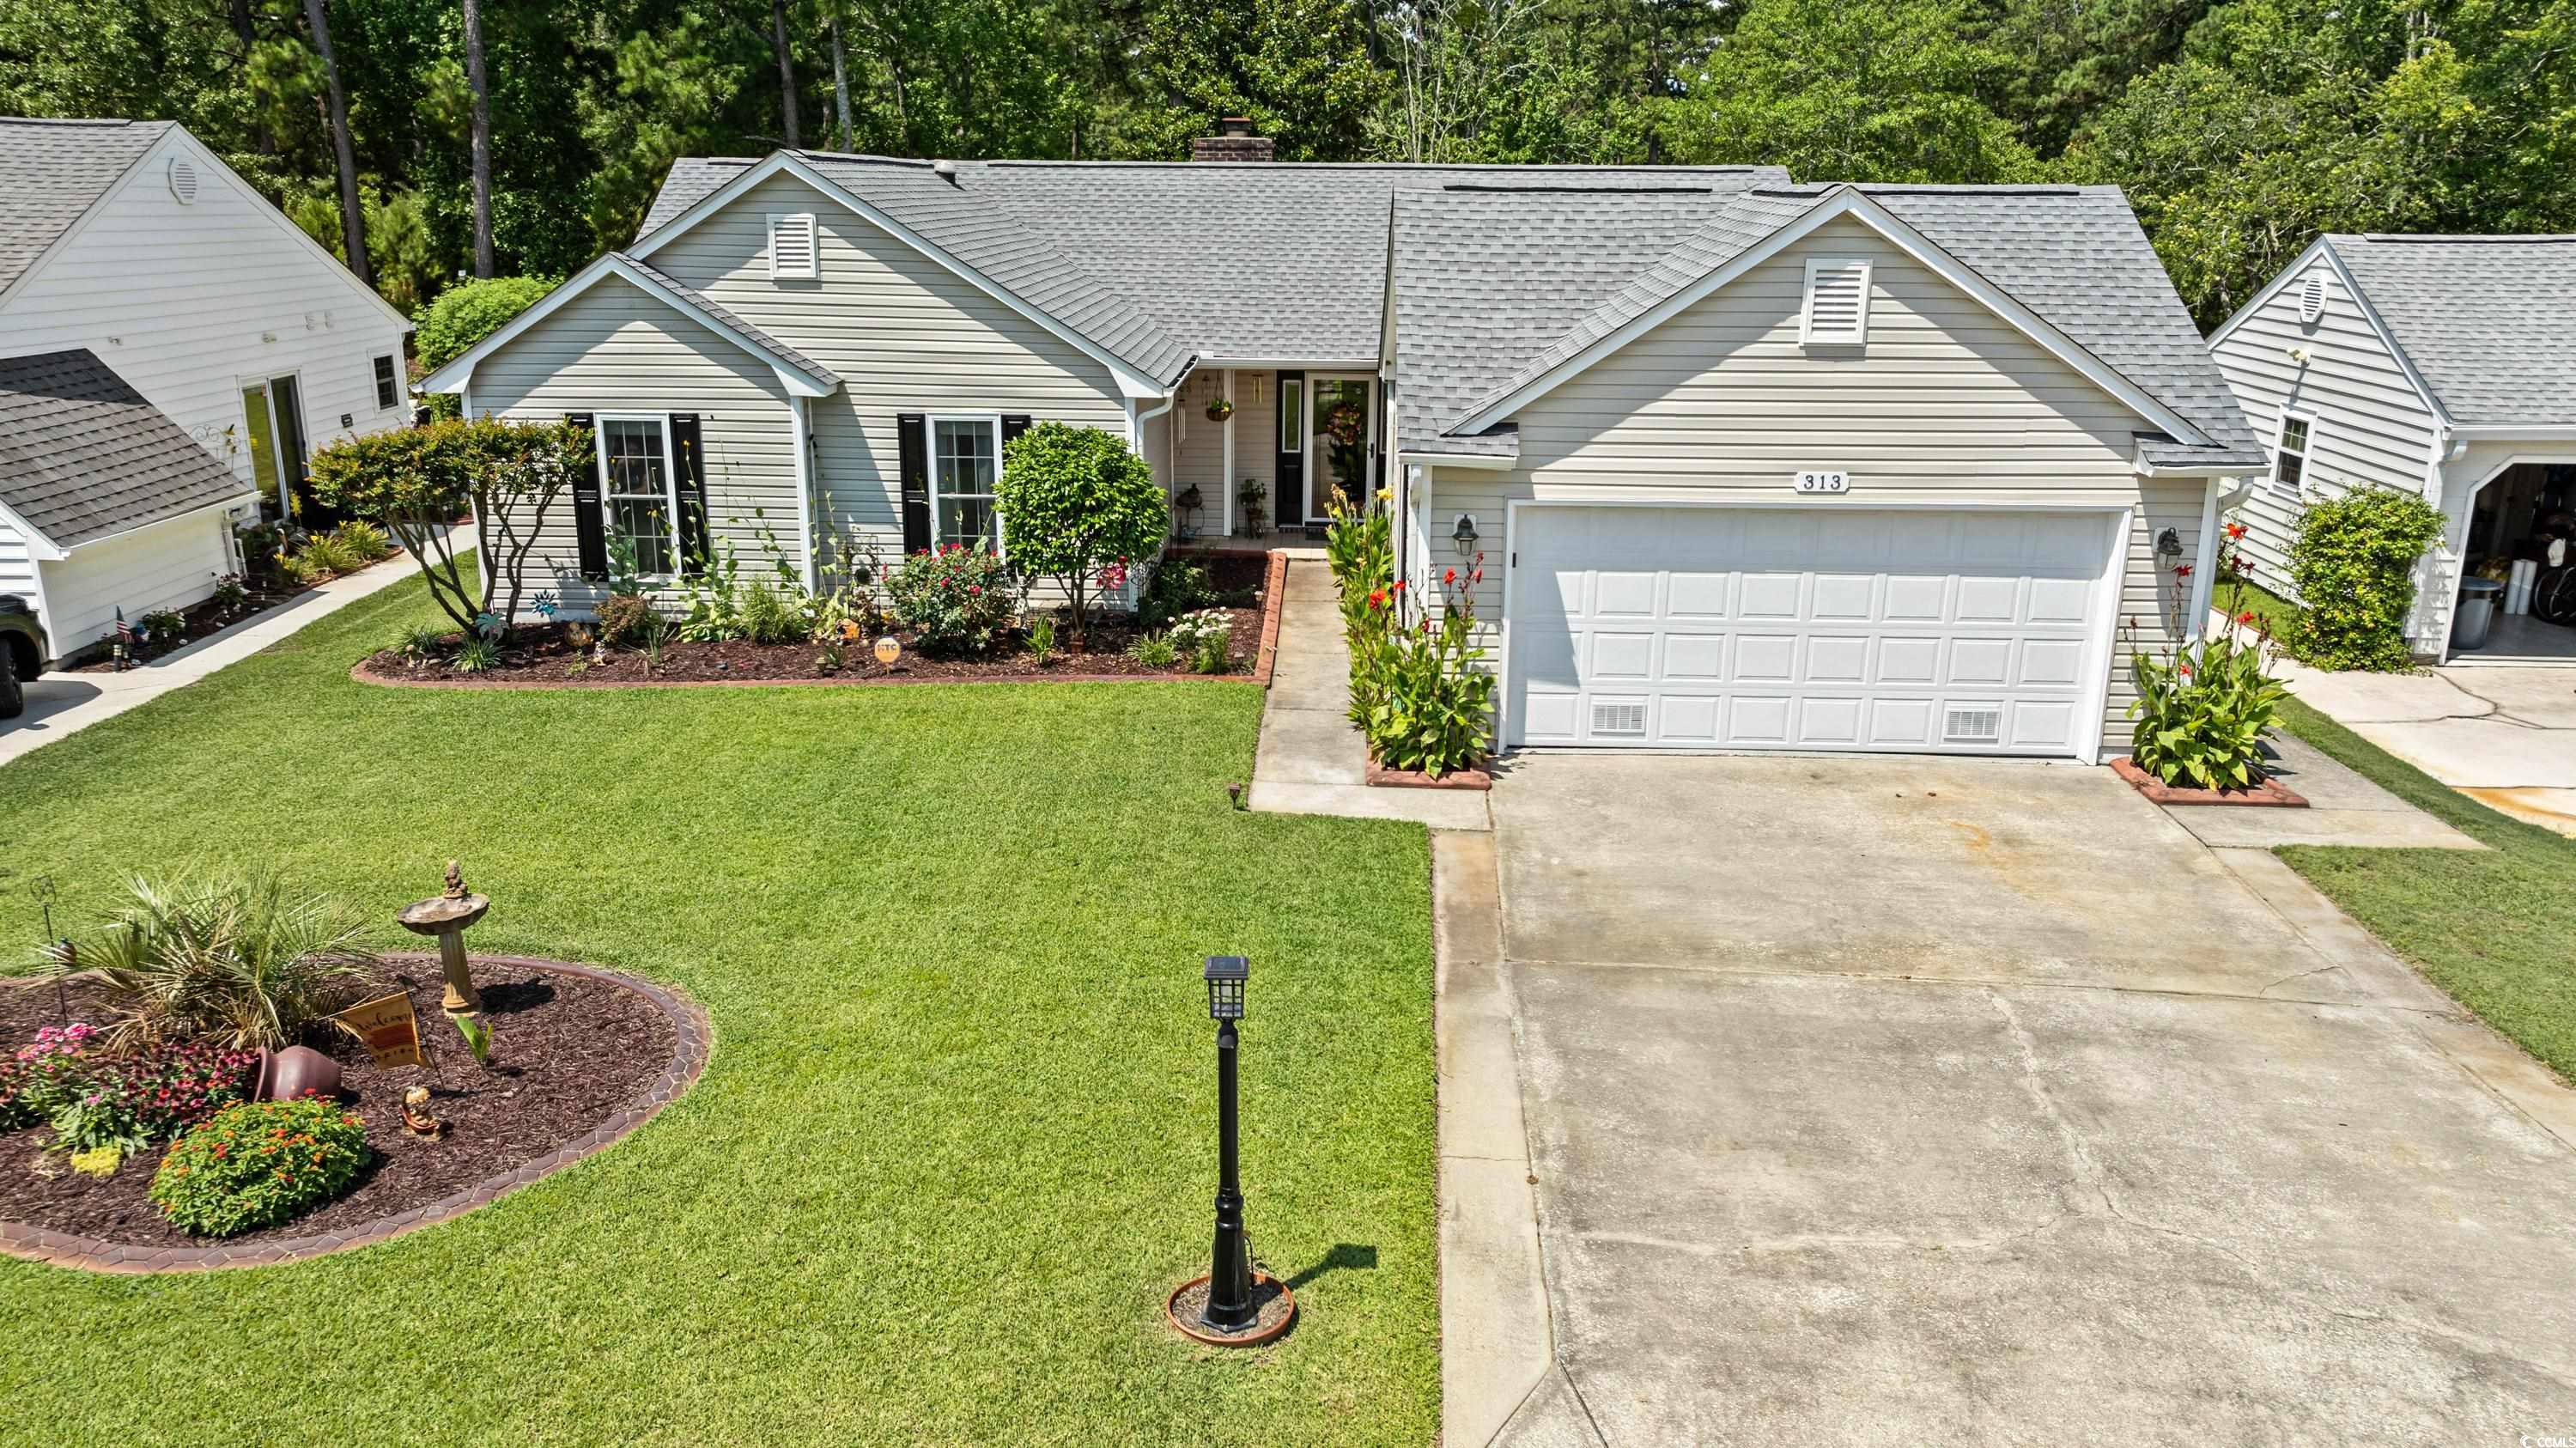 313 Mourning Dove Ln. Murrells Inlet, SC 29576